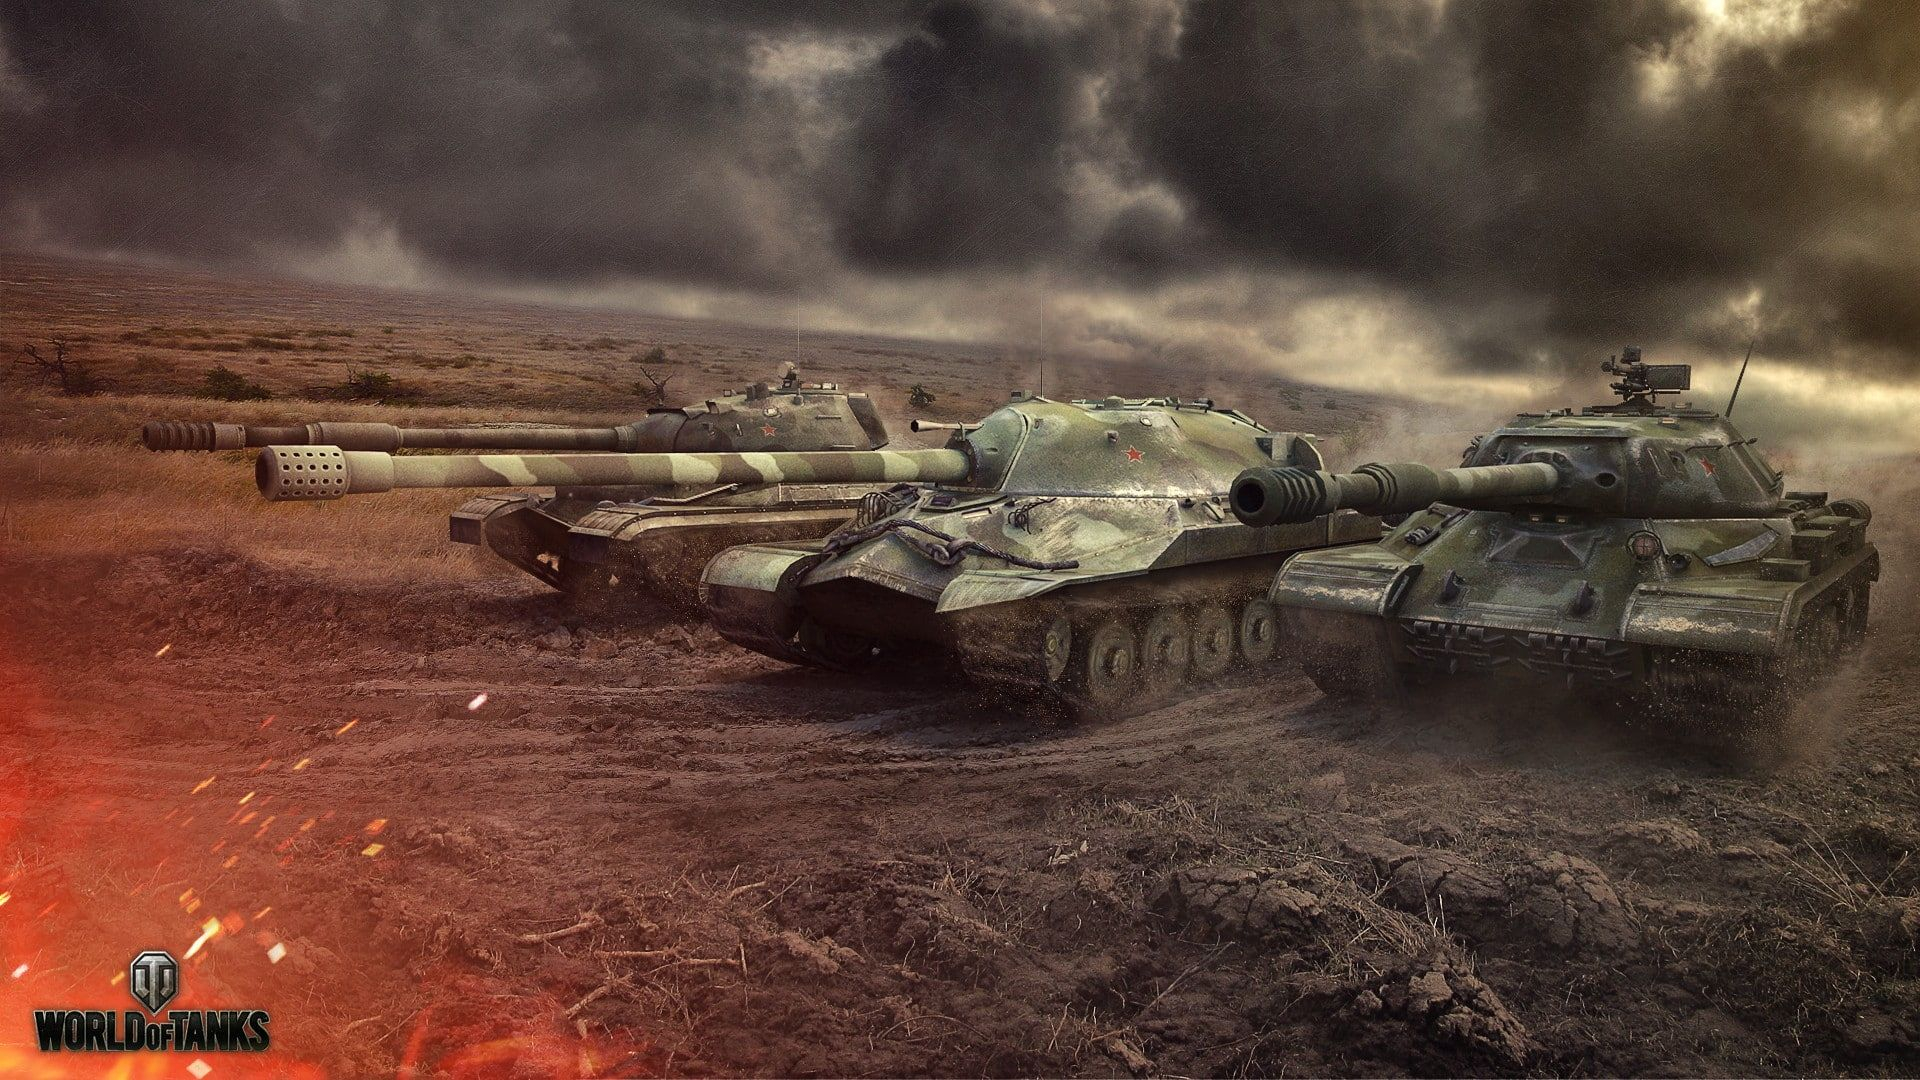 1920x1080 World of Tanks #tank #wargaming video games #IS-7 #IS-4 #IS-8 #1080P # wallpaper #hdwallpaper #desktop | World of tanks, Tank wallpaper, Tank